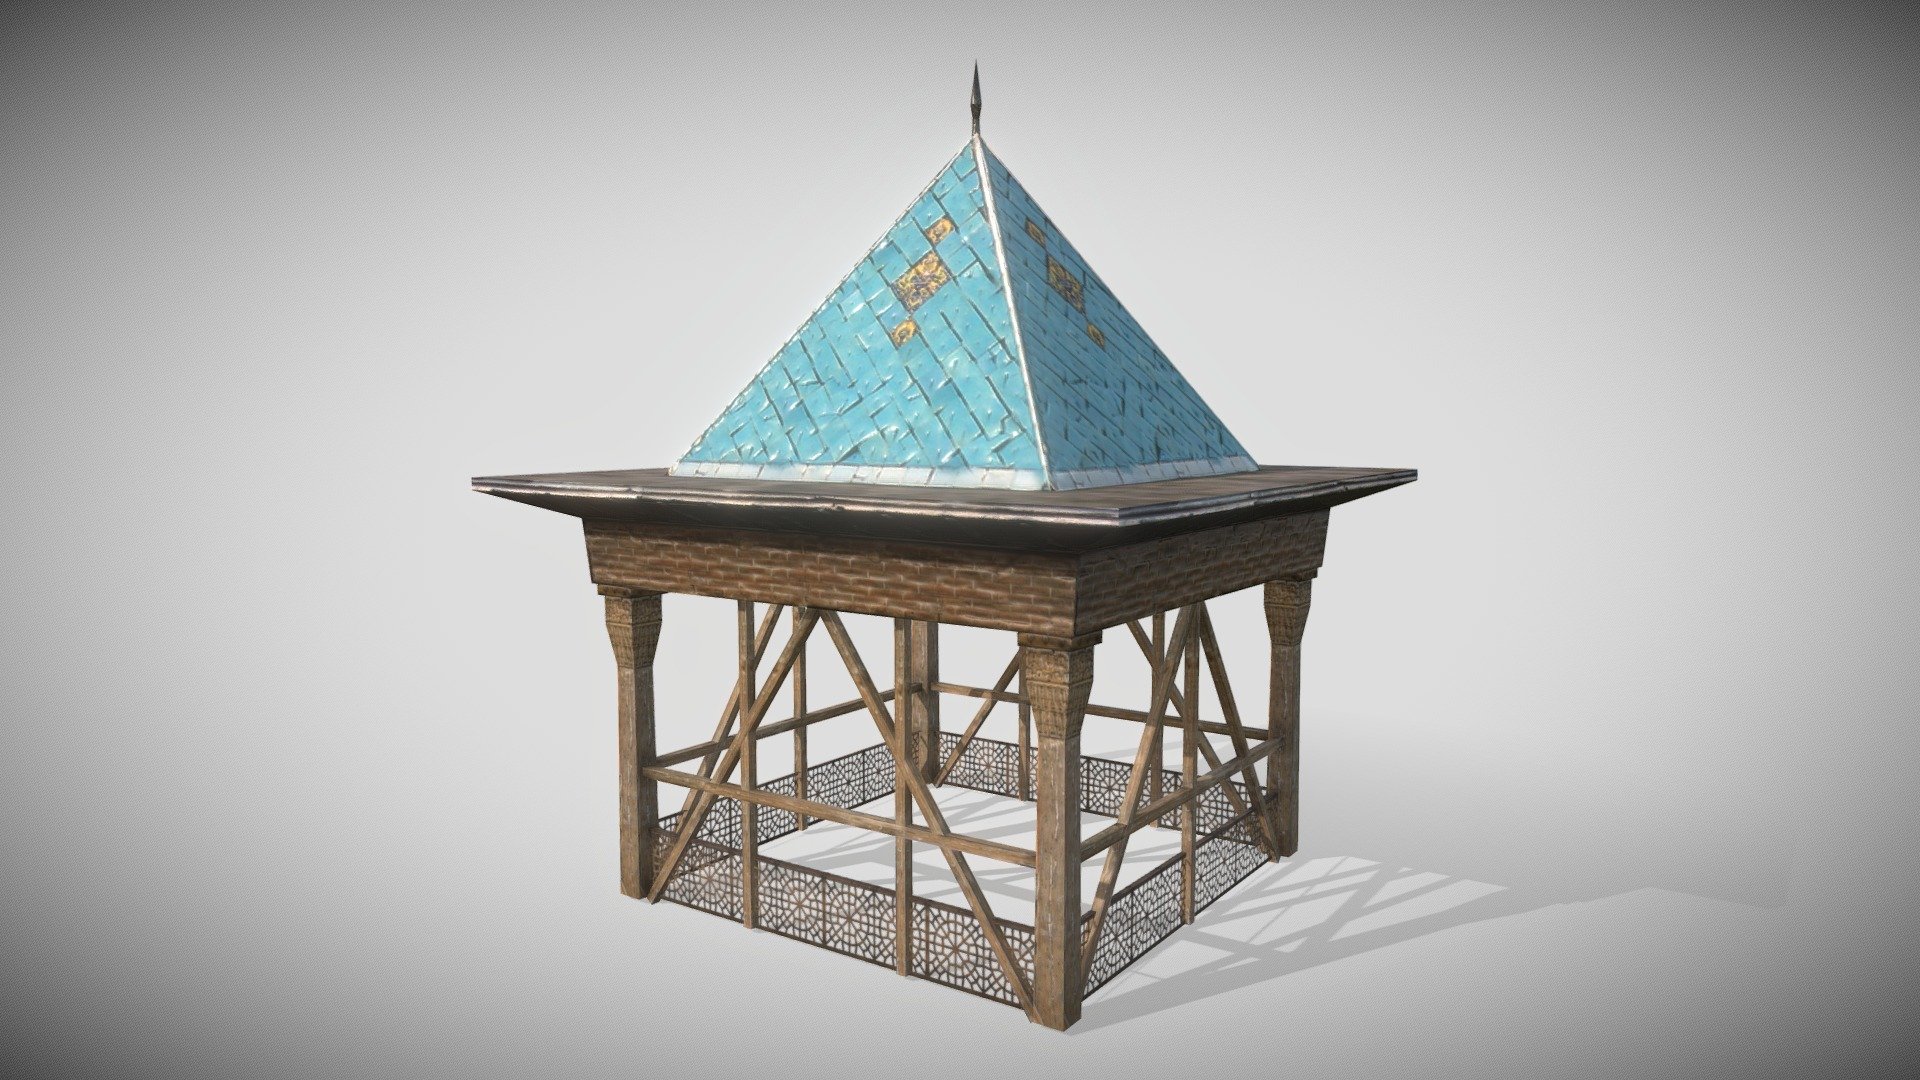 Low poly 3D Minaret can be used on VR/AR projects. I did some changes to the texture and topology. The minaret is a type of tower typically built into or adjacent to mosques. Minarets serve multiple purposes. While they provide a visual focal point, they are generally used for the Muslim call to prayer. The basic form of a minaret includes a base, shaft, cap, and head 3d model